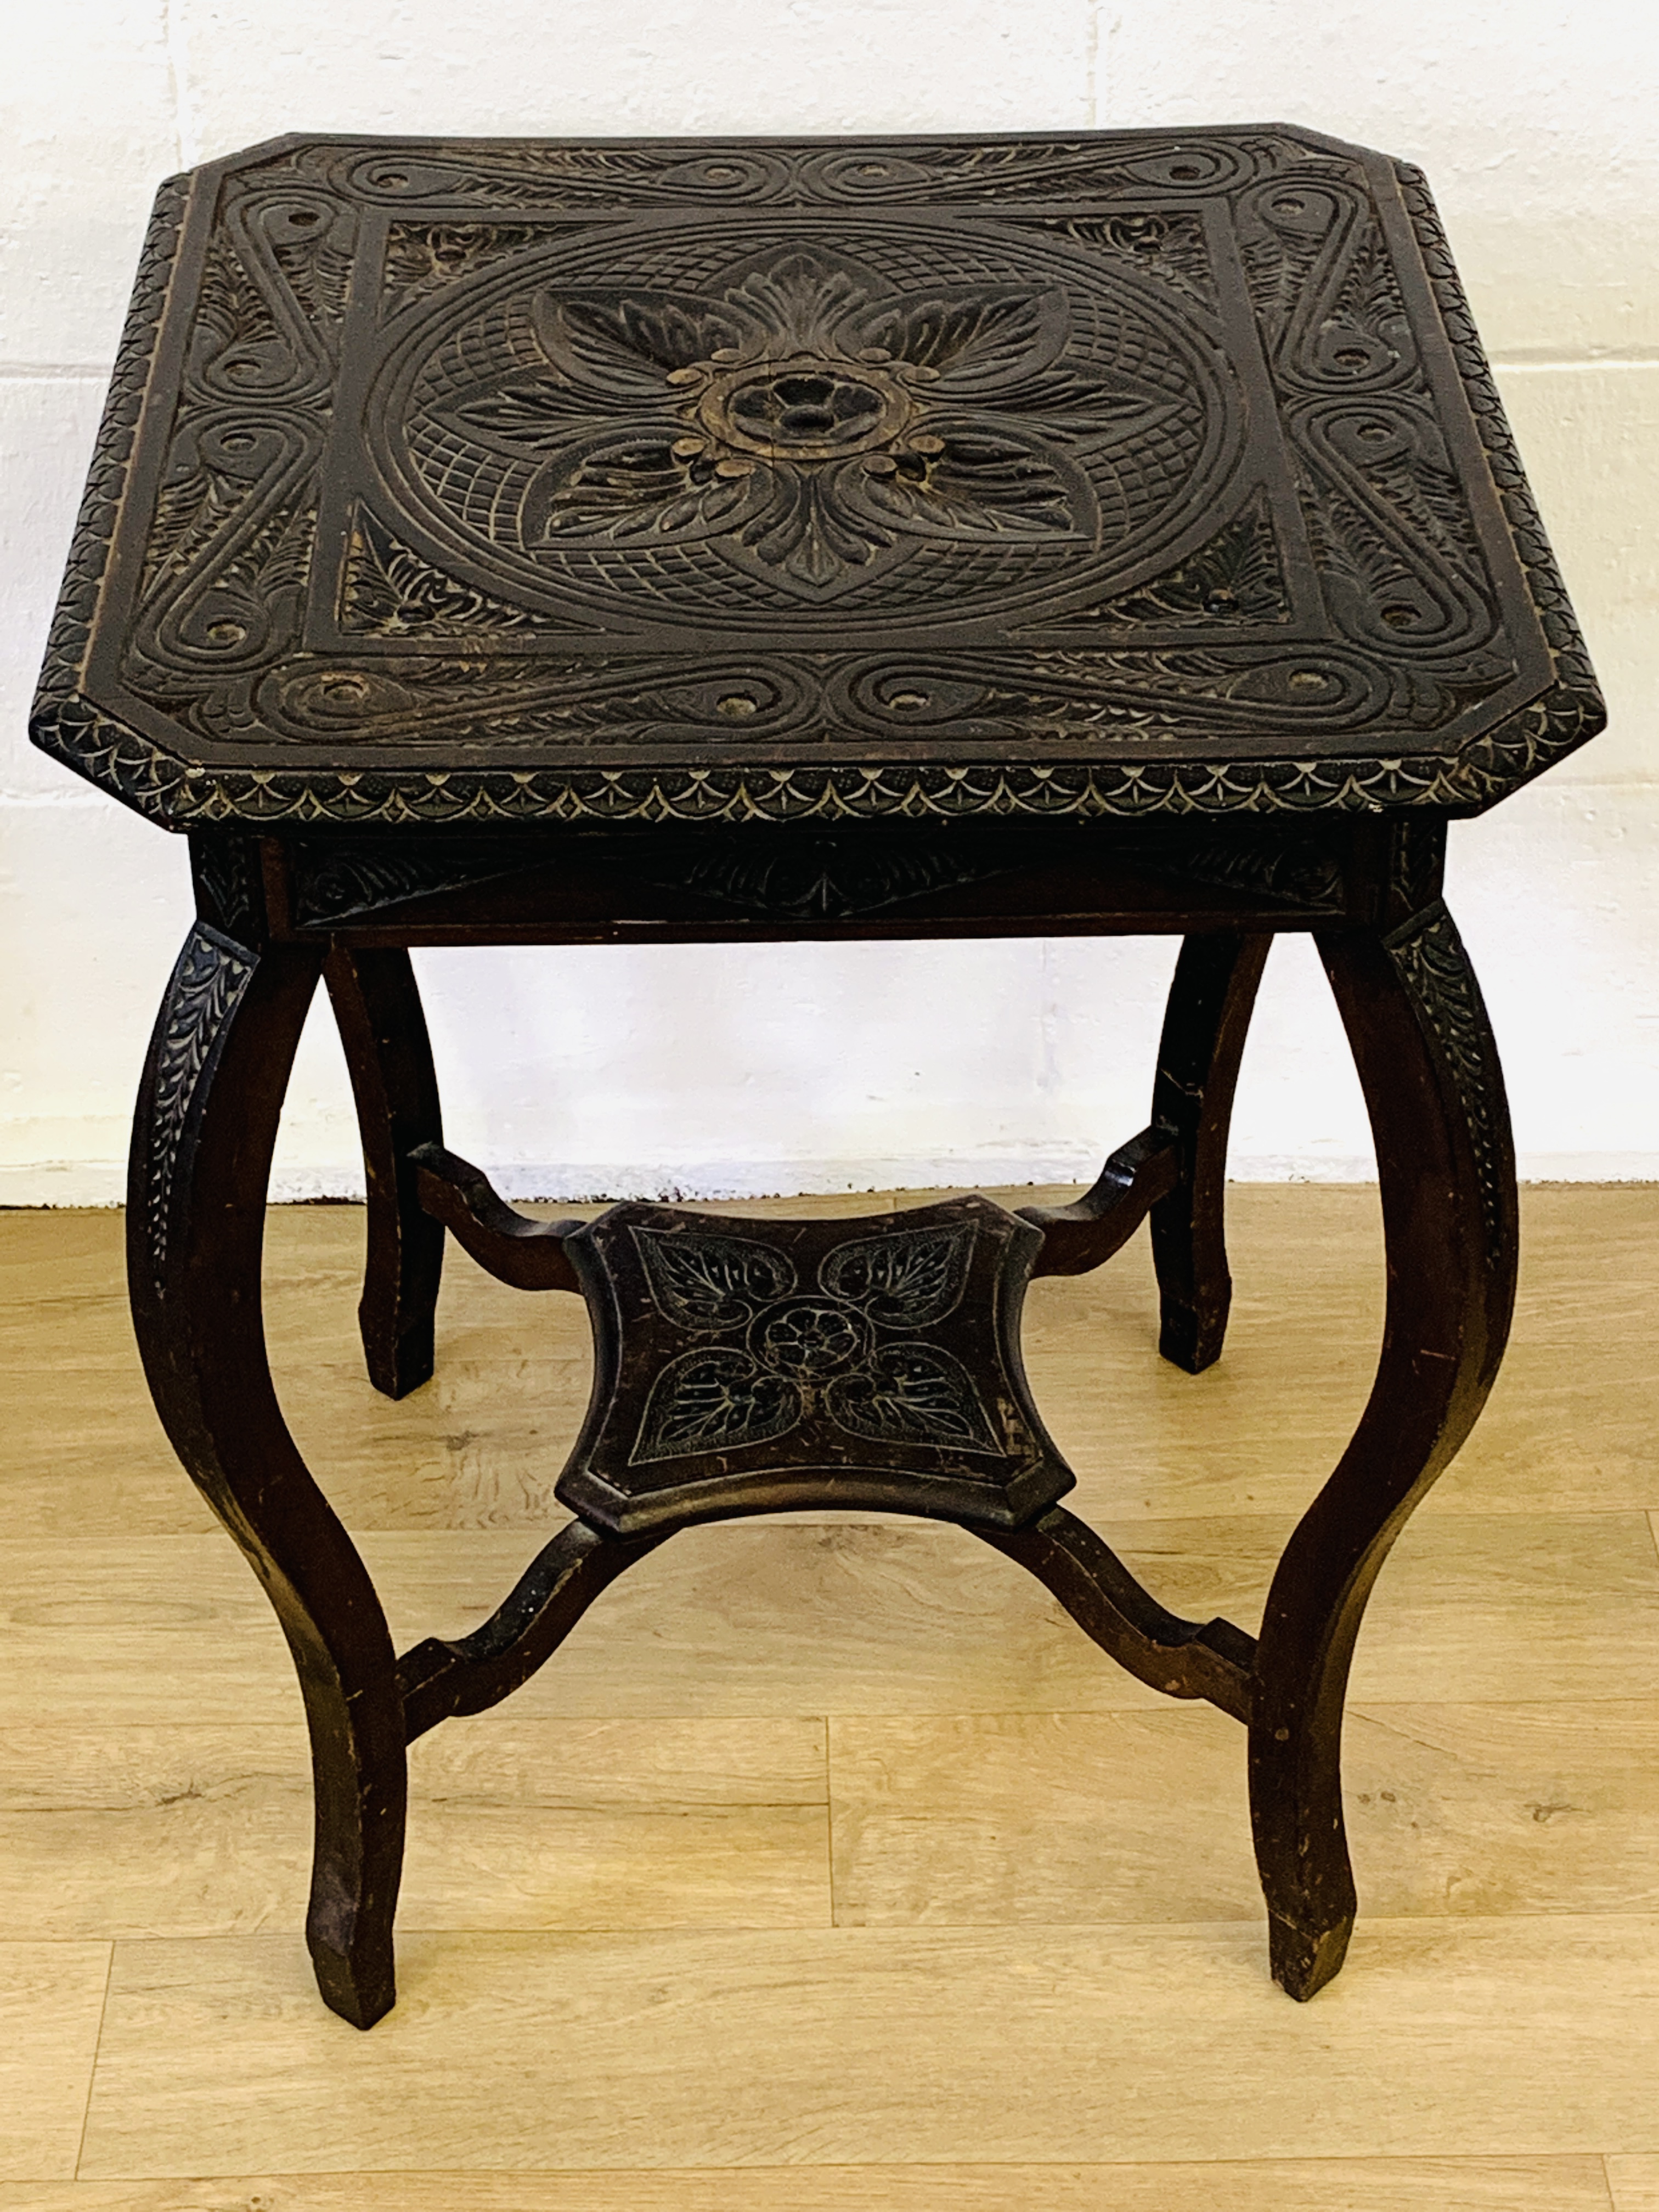 Carved wood display table - Image 2 of 6